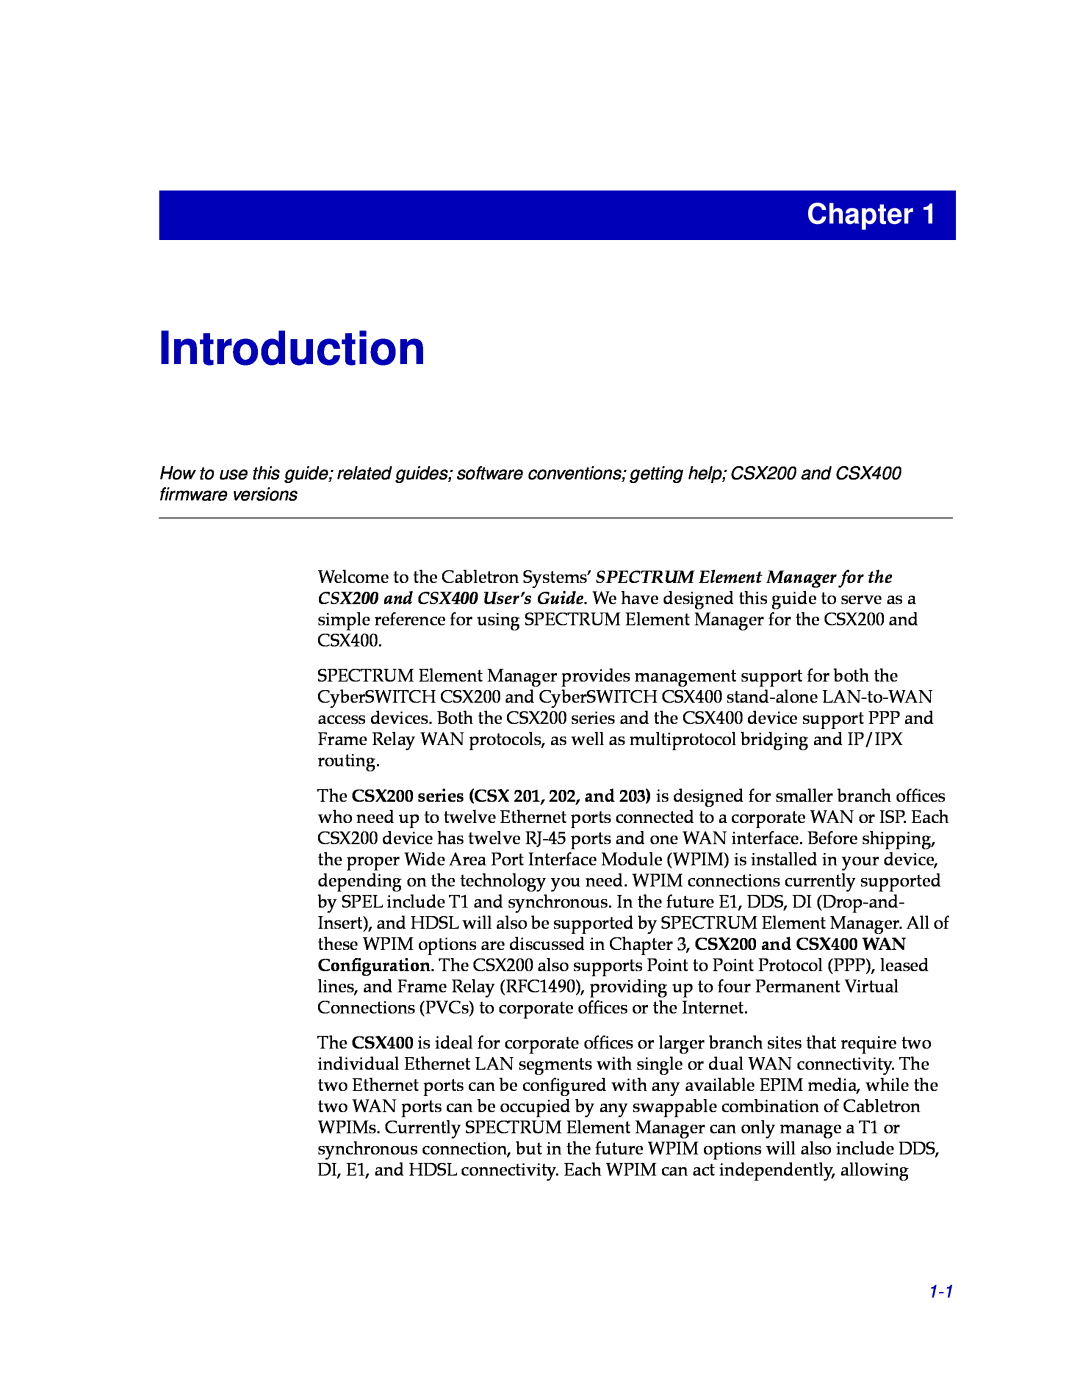 Cabletron Systems CSX200, CSX400 manual Introduction, Chapter 